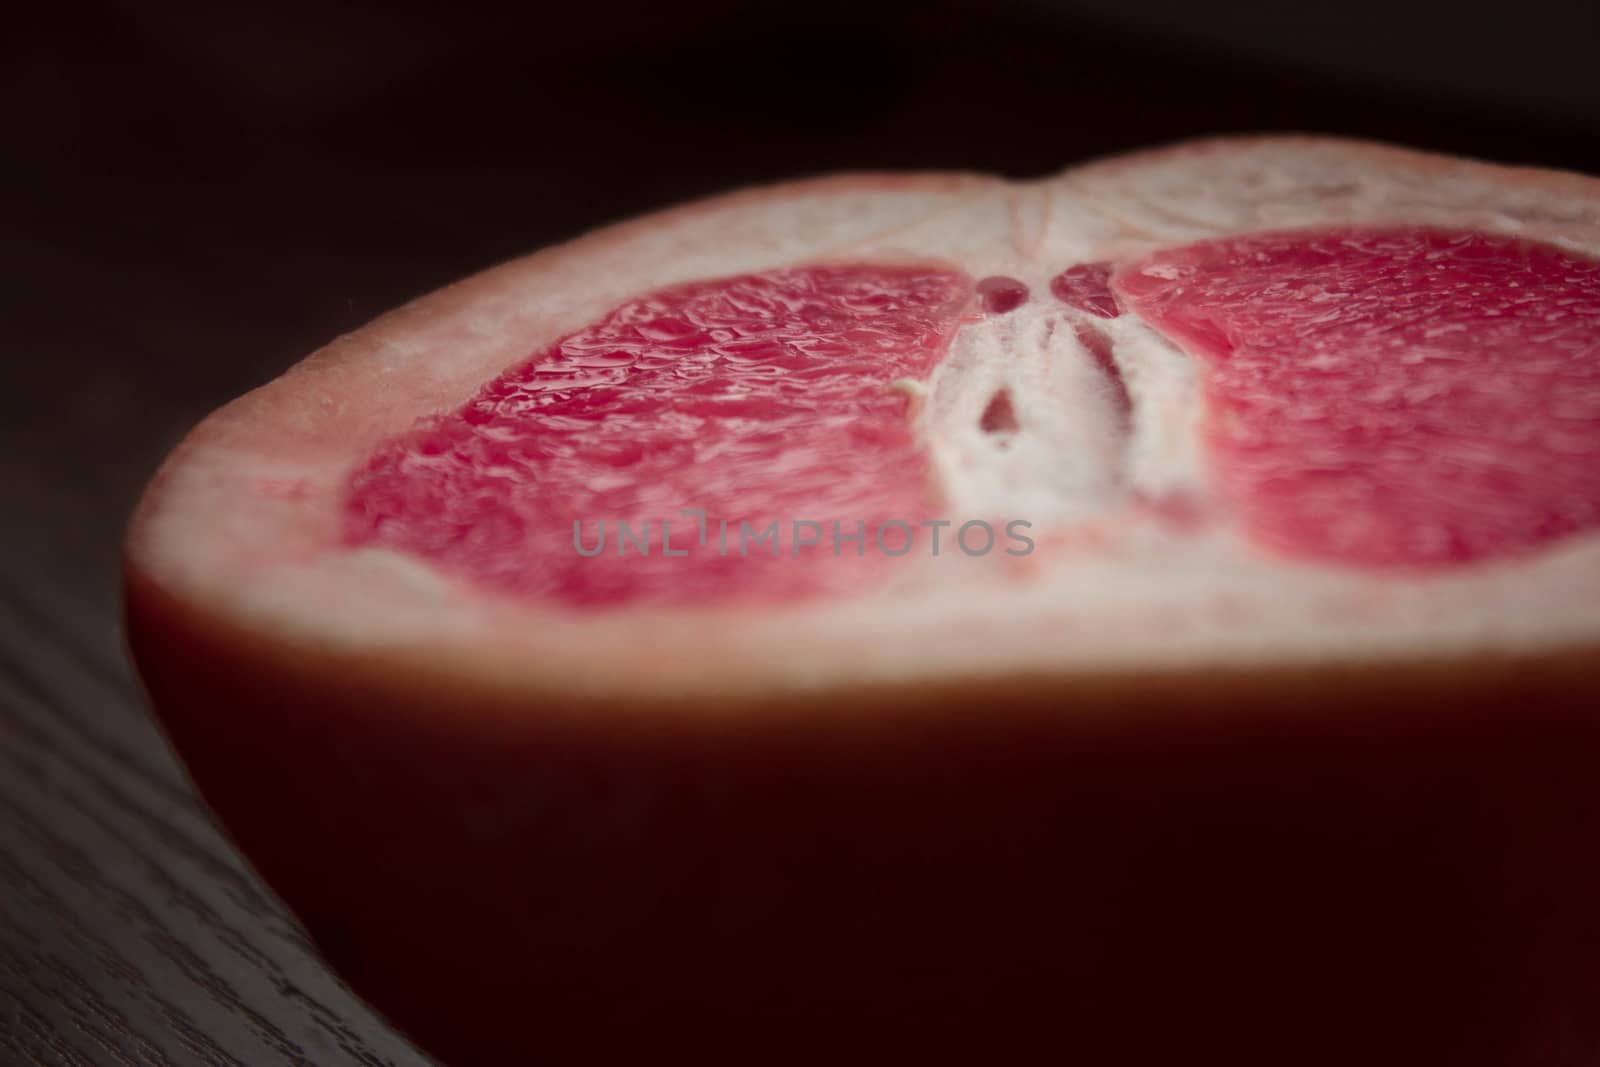 fresh juicy grapefruit on a wooden table